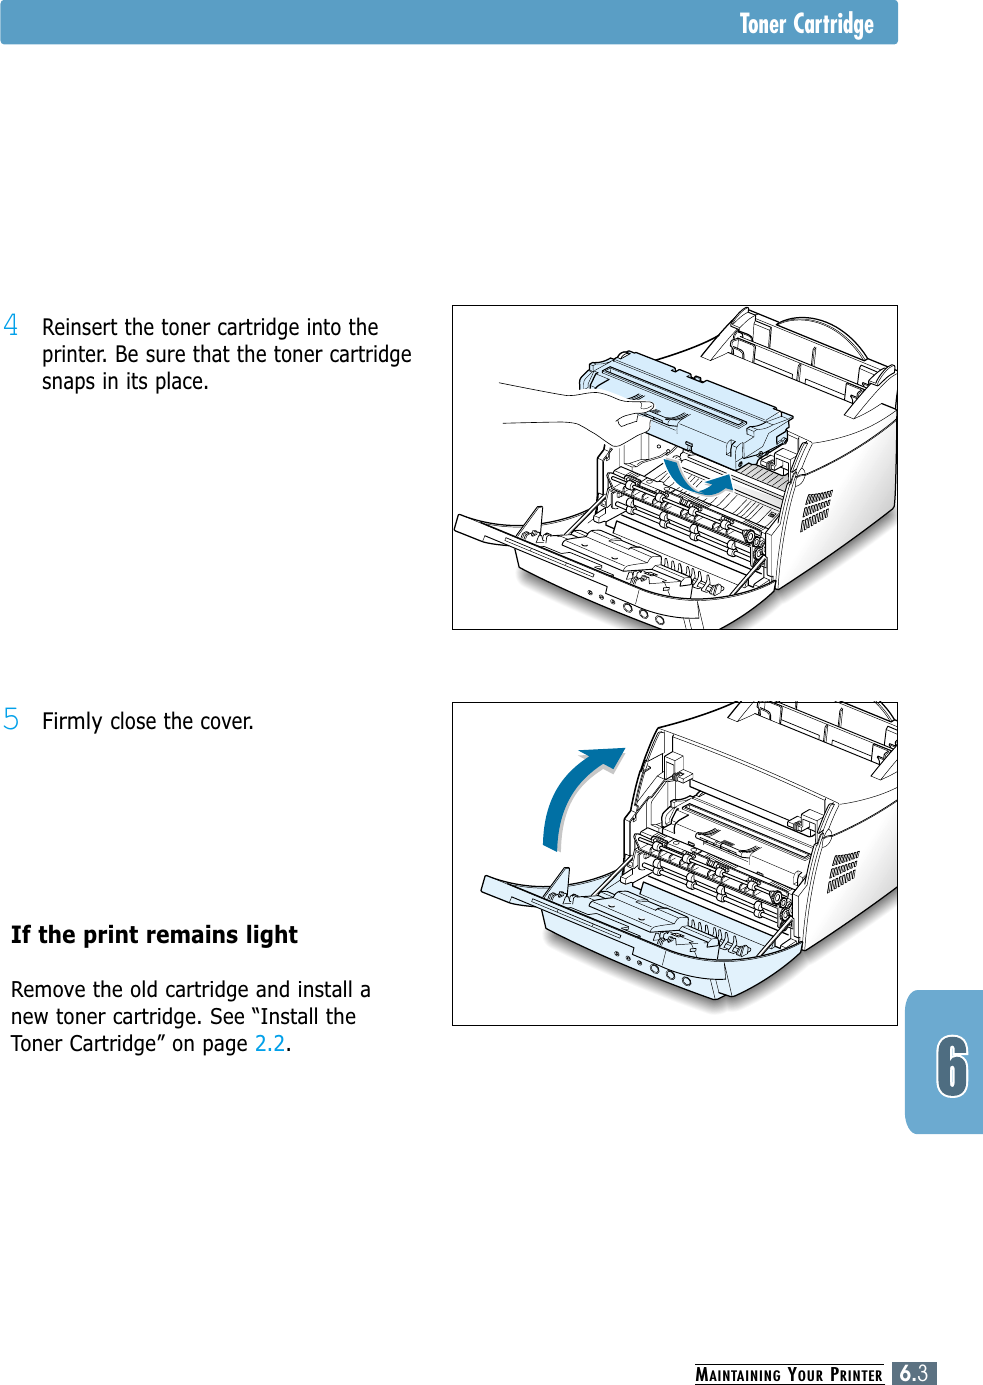 MAINTAINING YOUR PRINTER6.3Toner Cartridge4Reinsert the toner cartridge into theprinter. Be sure that the toner cartridgesnaps in its place.5Firmly close the cover.If the print remains light Remove the old cartridge and install anew toner cartridge. See “Install theToner Cartridge” on page 2.2.